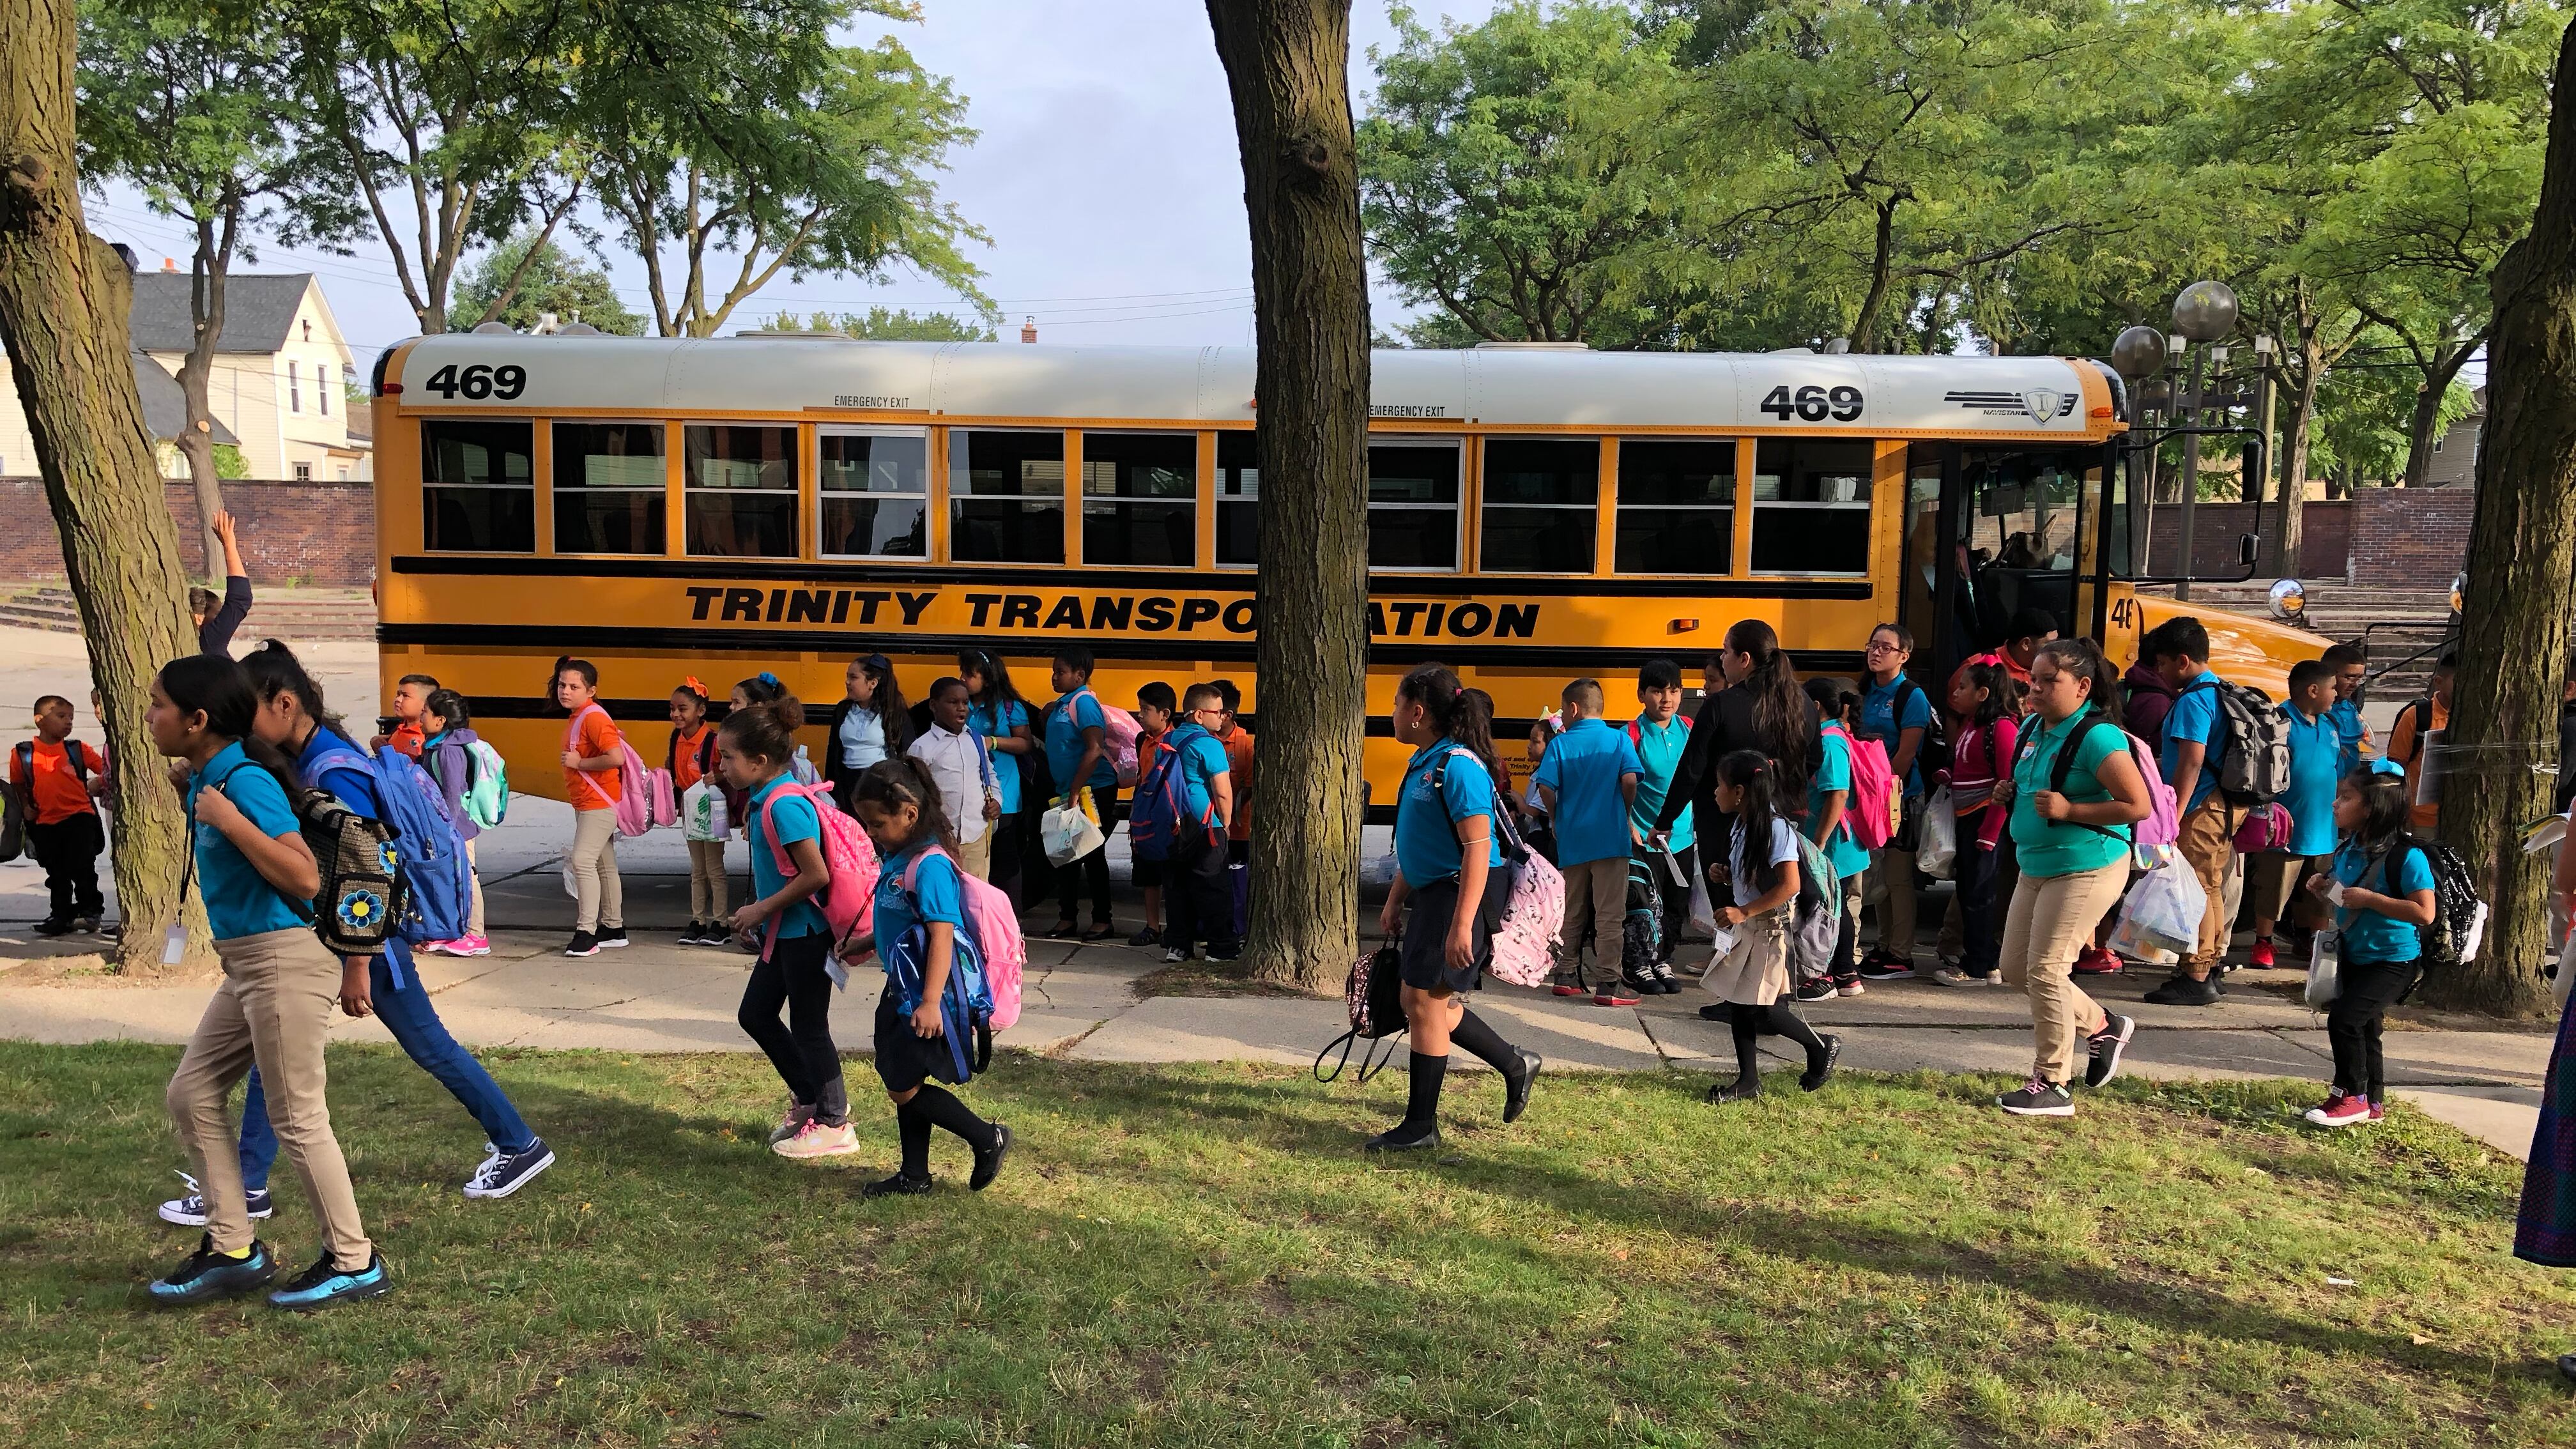 Students arrive at Escuela Avancemos, a Detroit charter school, on the first day of school in 2019.